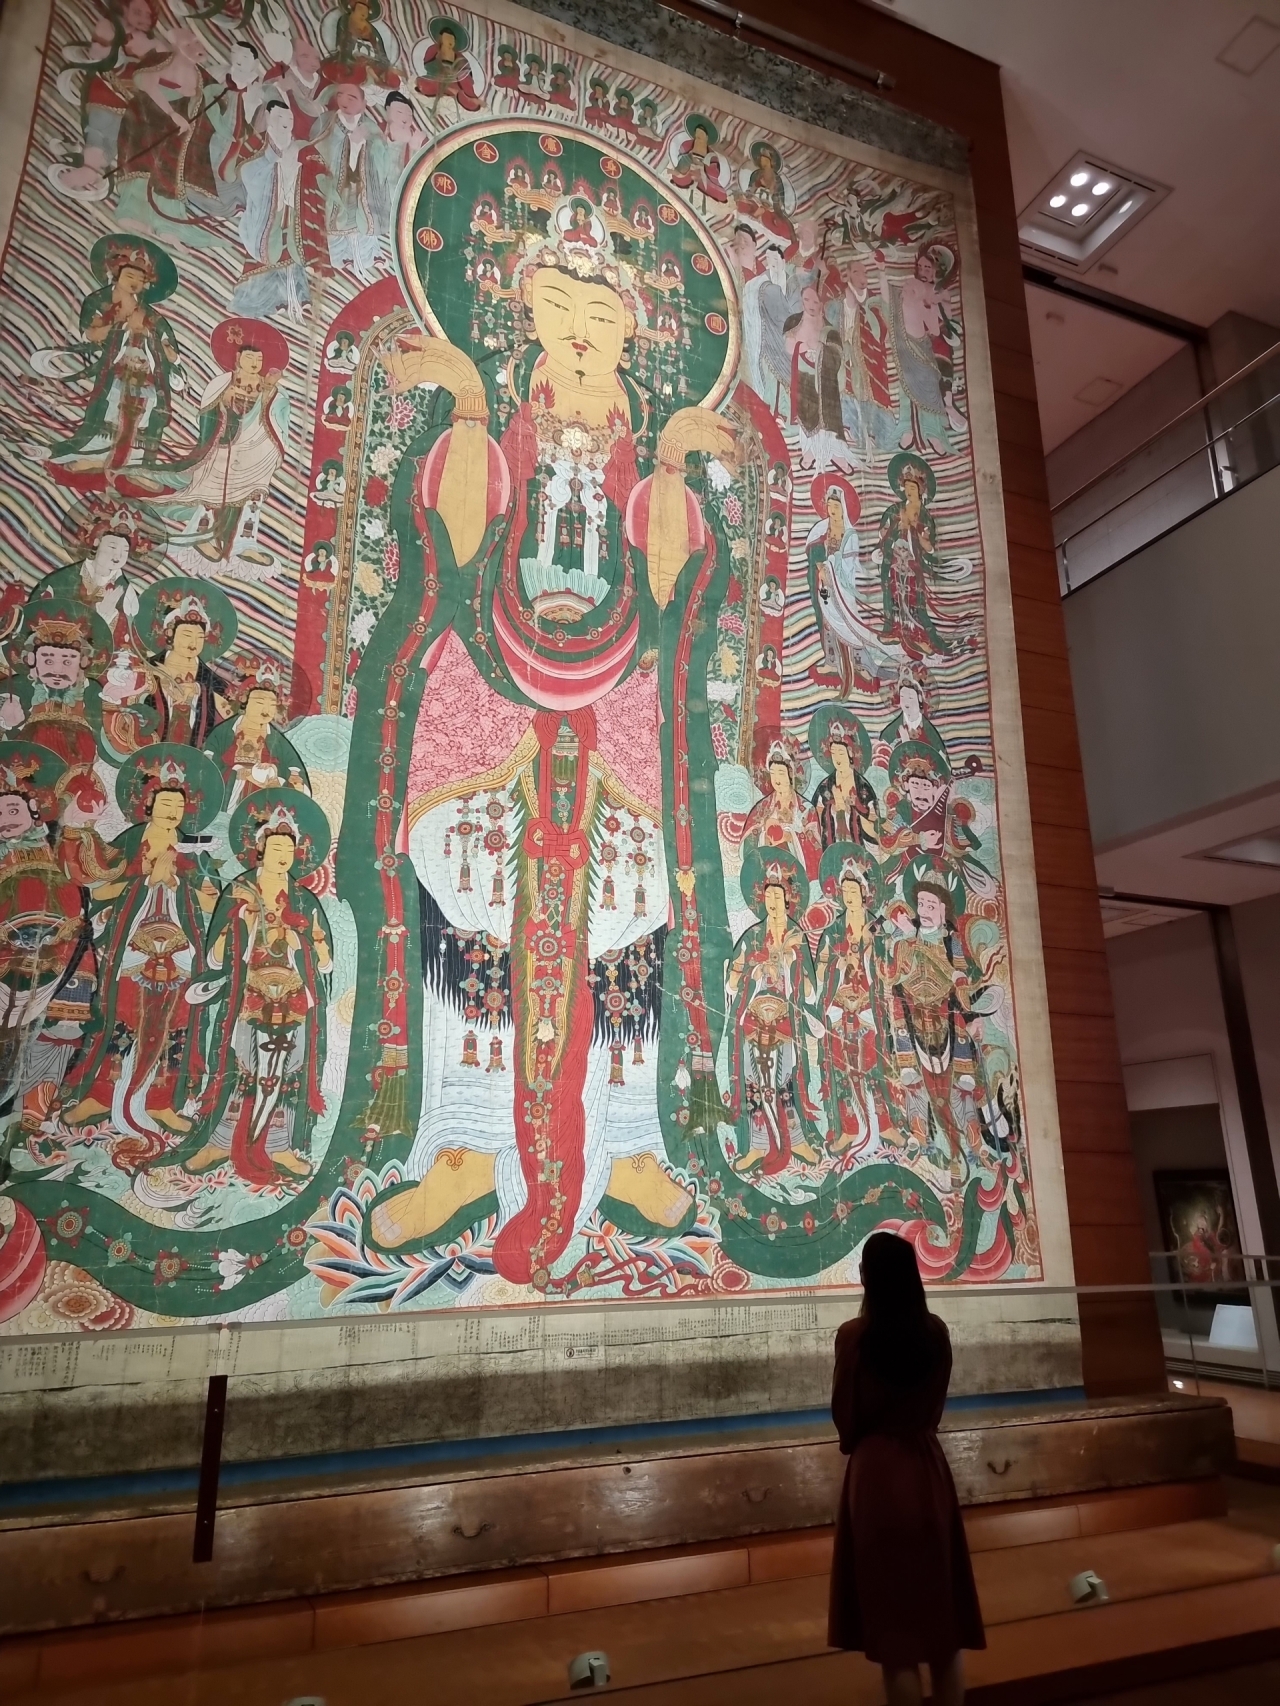 A large-scale banner painting of a Buddha from Sudeoksa in South Chungcheong Province is on display at National Museum of Korea in Yongsan-gu, Seoul. (NMK)